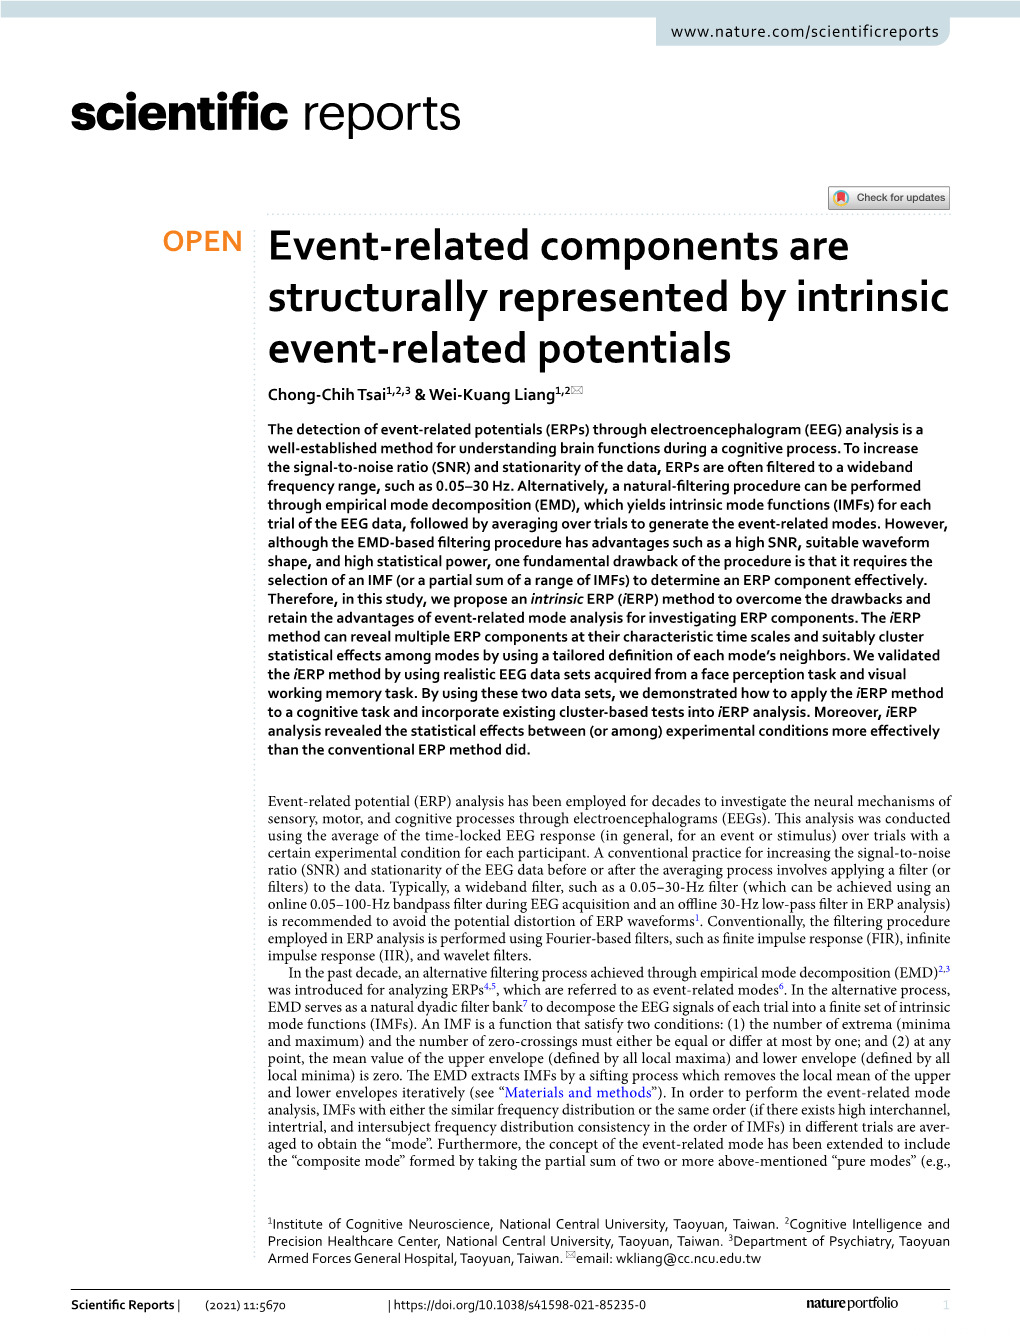 Event-Related Components Are Structurally Represented by Intrinsic